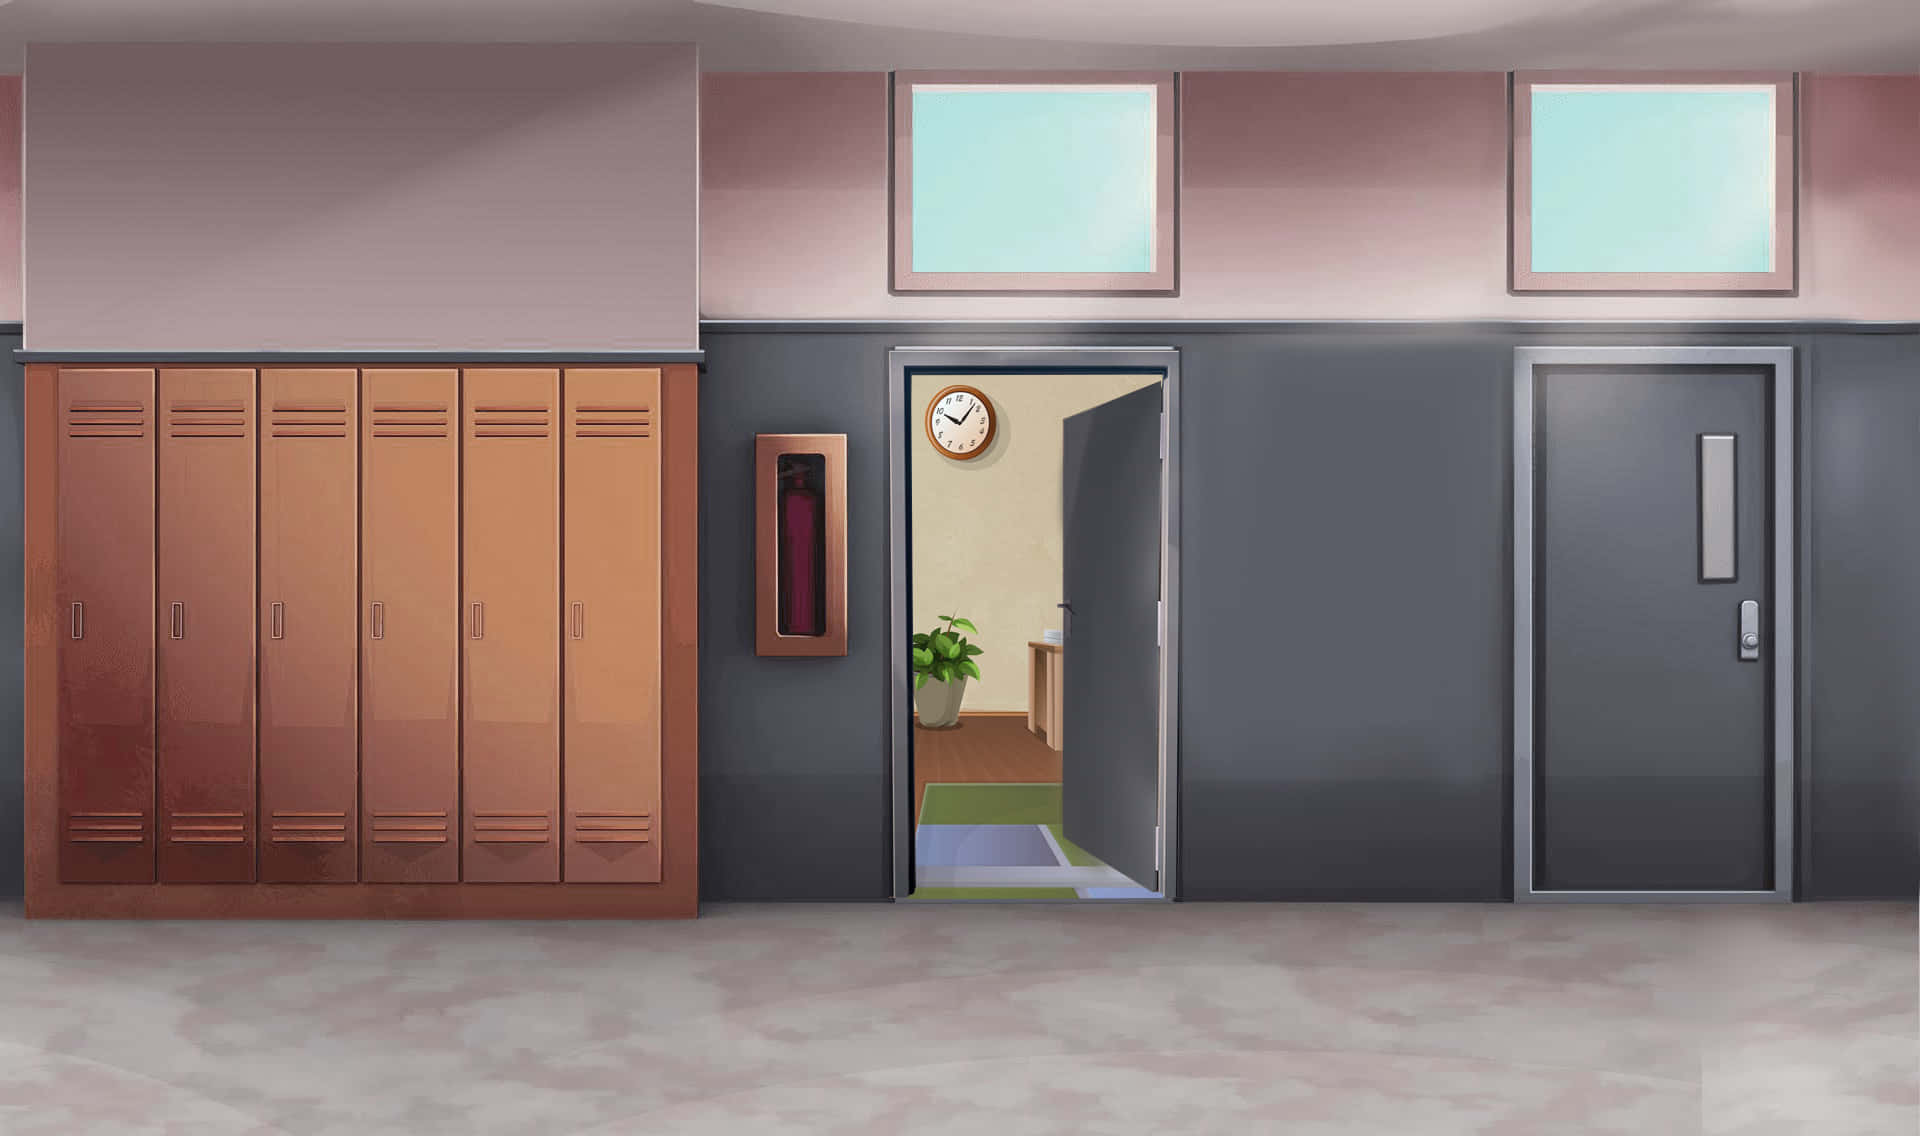 A Cartoon Image Of A Hallway With Lockers And A Door